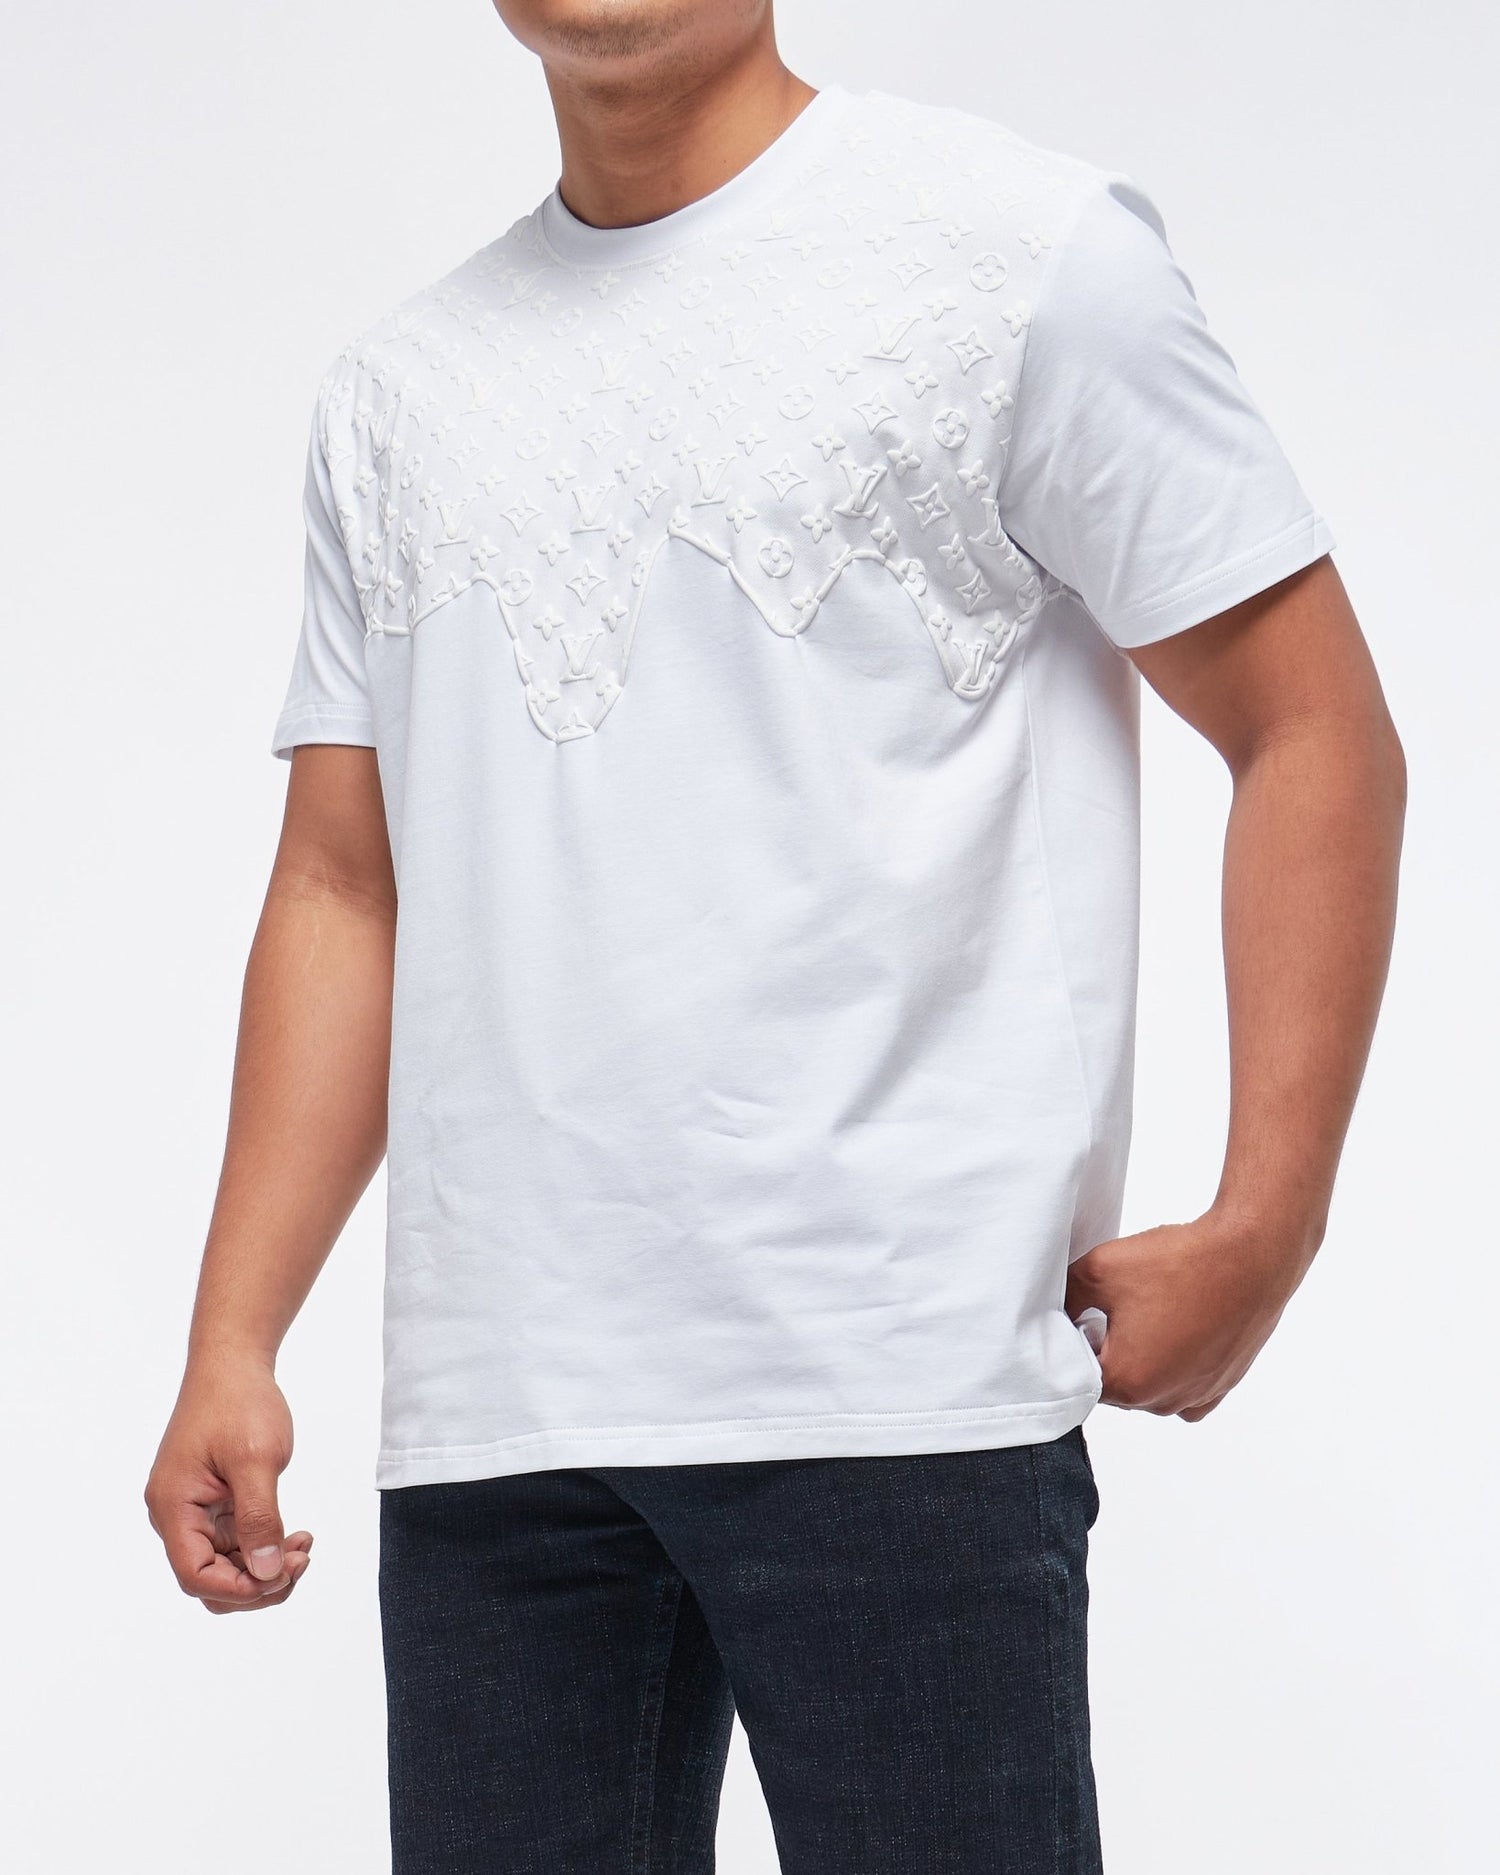 MOI OUTFIT-Monogram Front and Back Printed Men T-Shirt 15.90